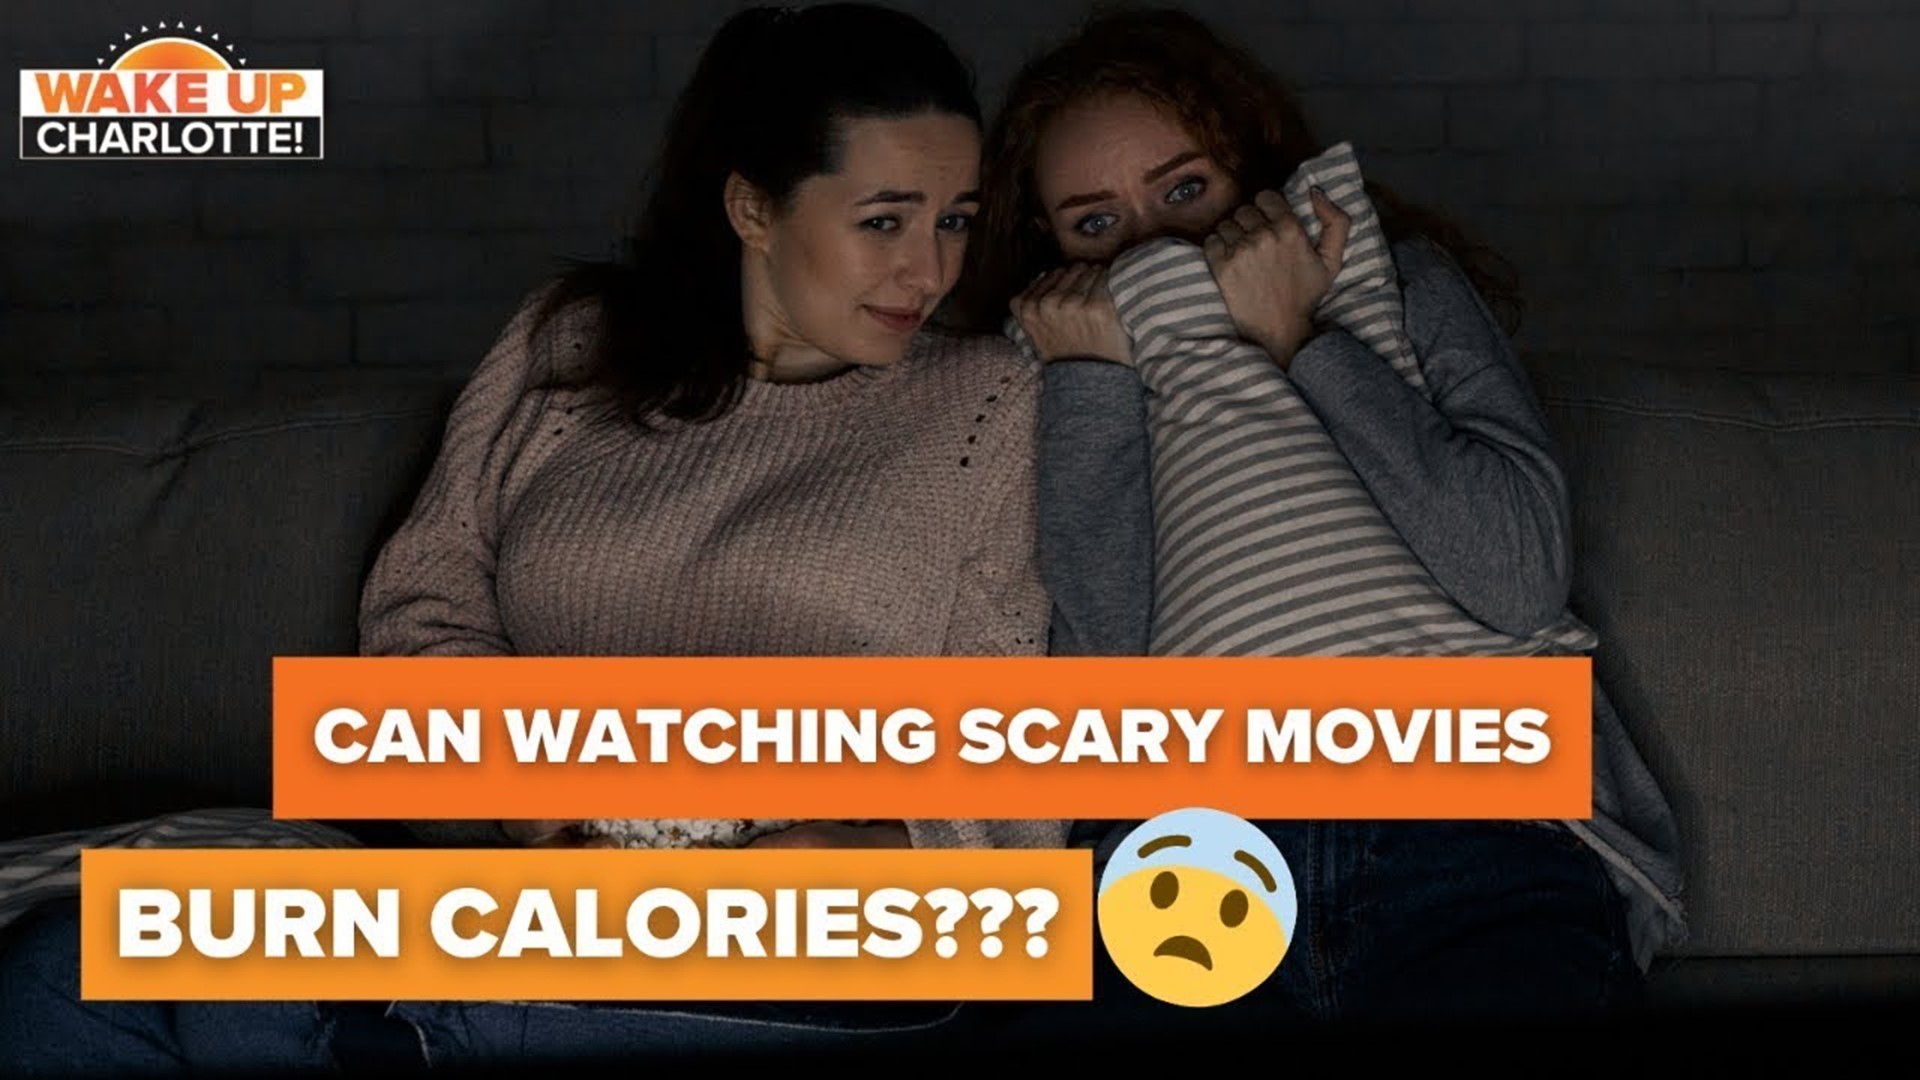 'Tis the season of pumpkin spice, trick-or-treating and scary movies. Believe it or not, one of those can be good for your health.